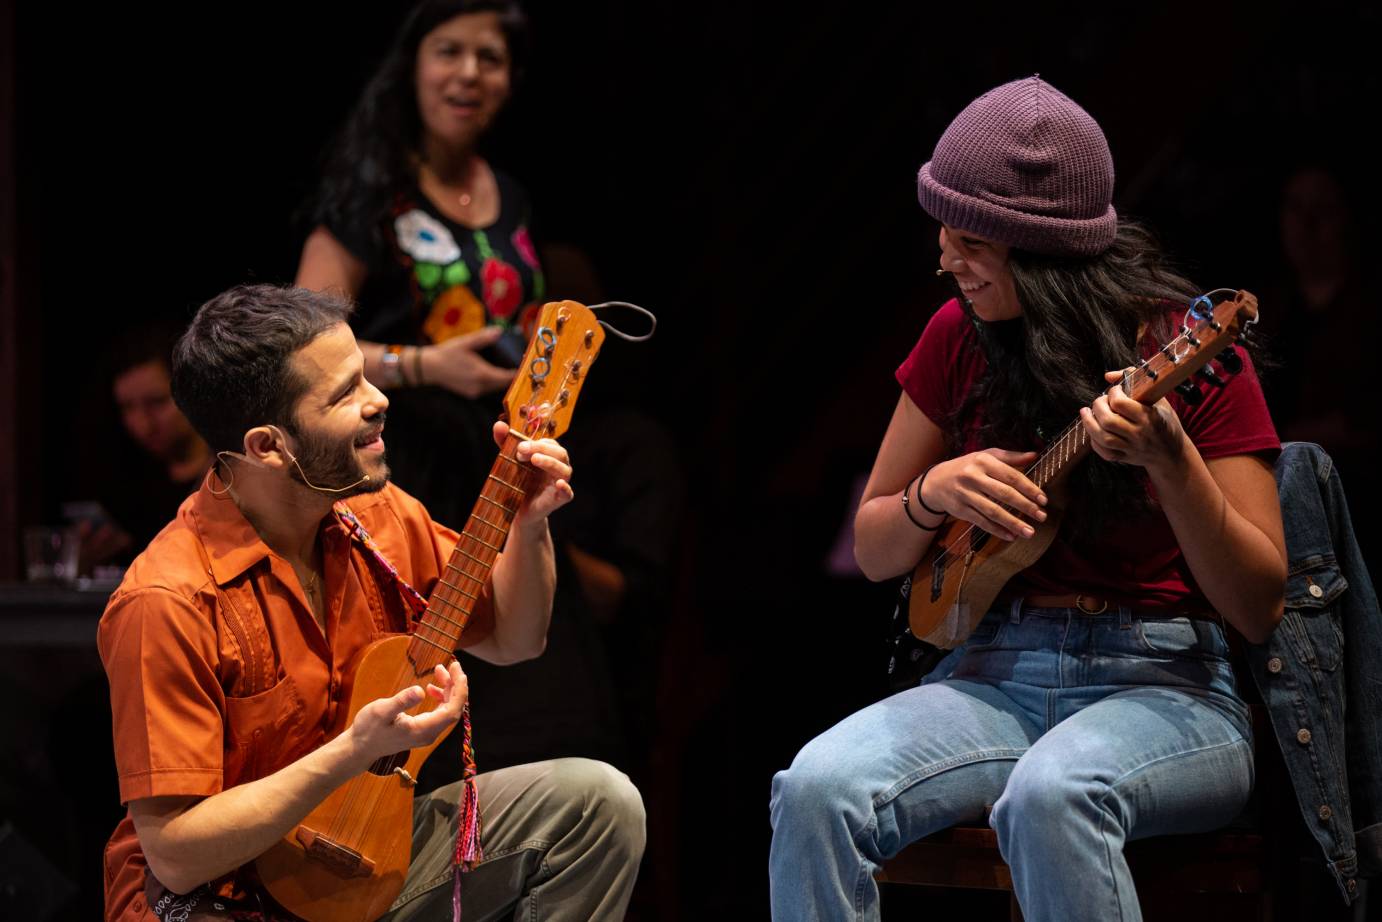 A man and a woman play stringed instruments as they smile at each other